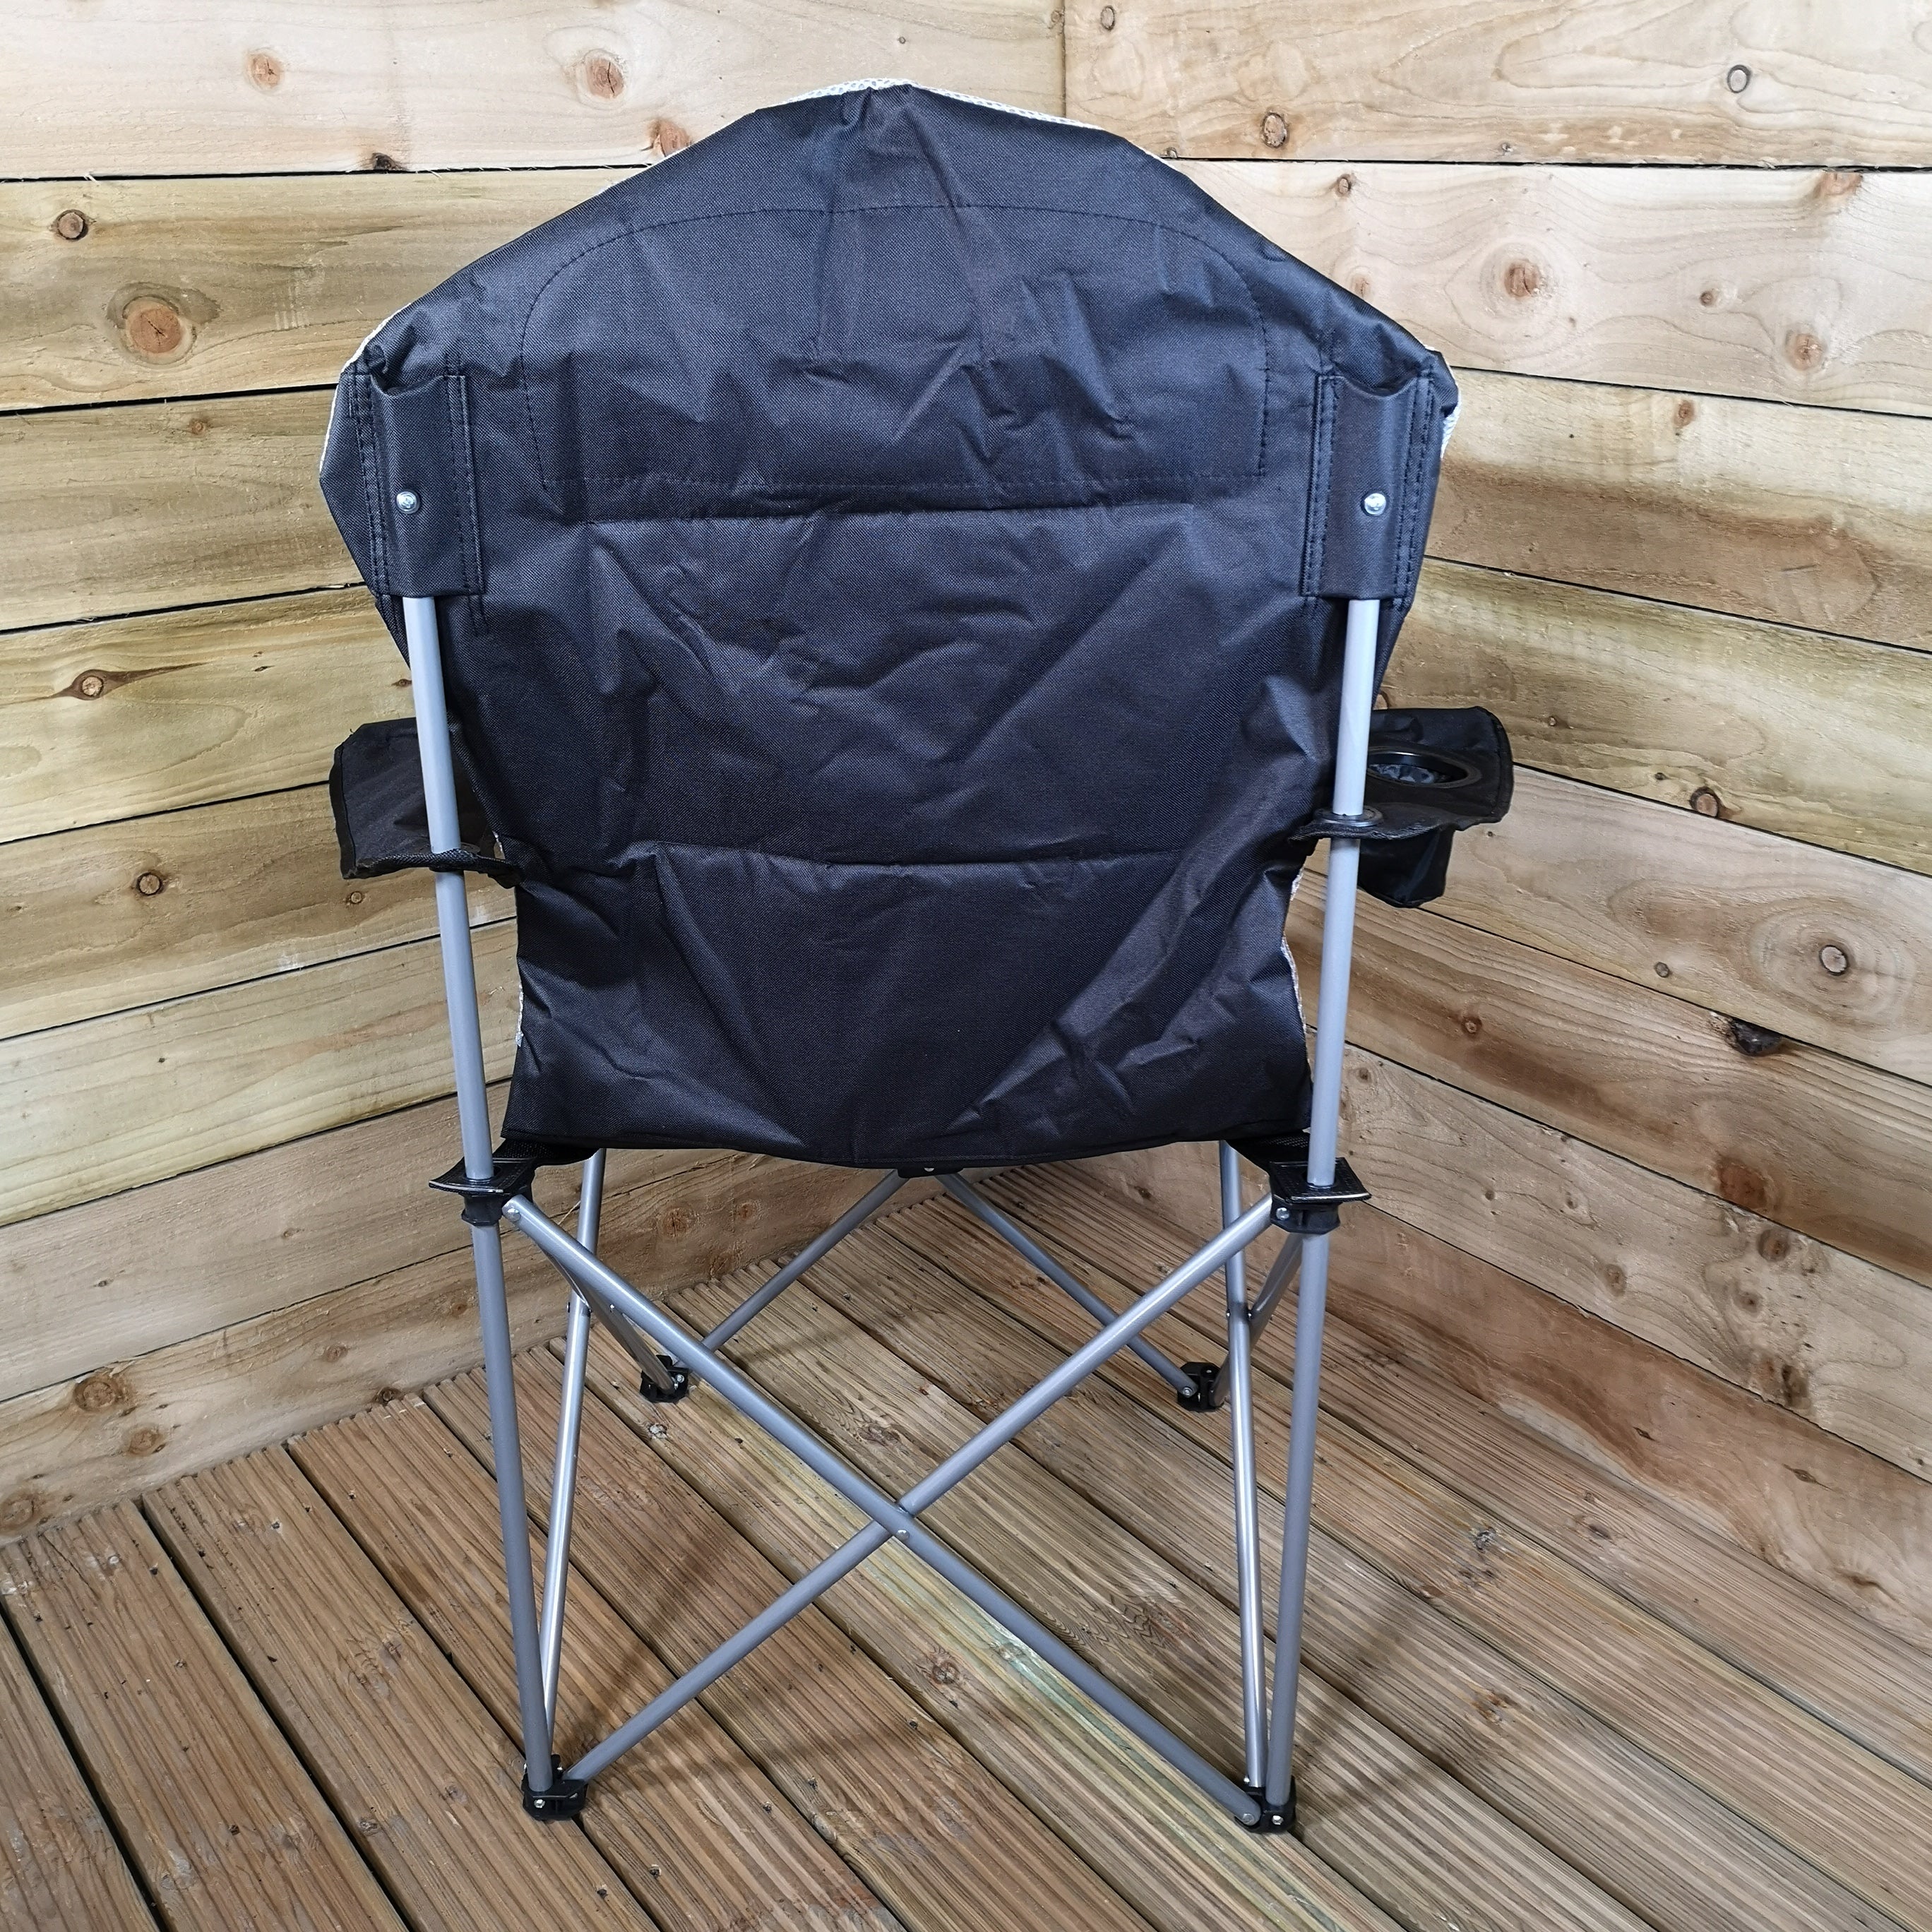 Luxury Padded High Back Folding Outdoor / Camping / Fishing Chair in Black